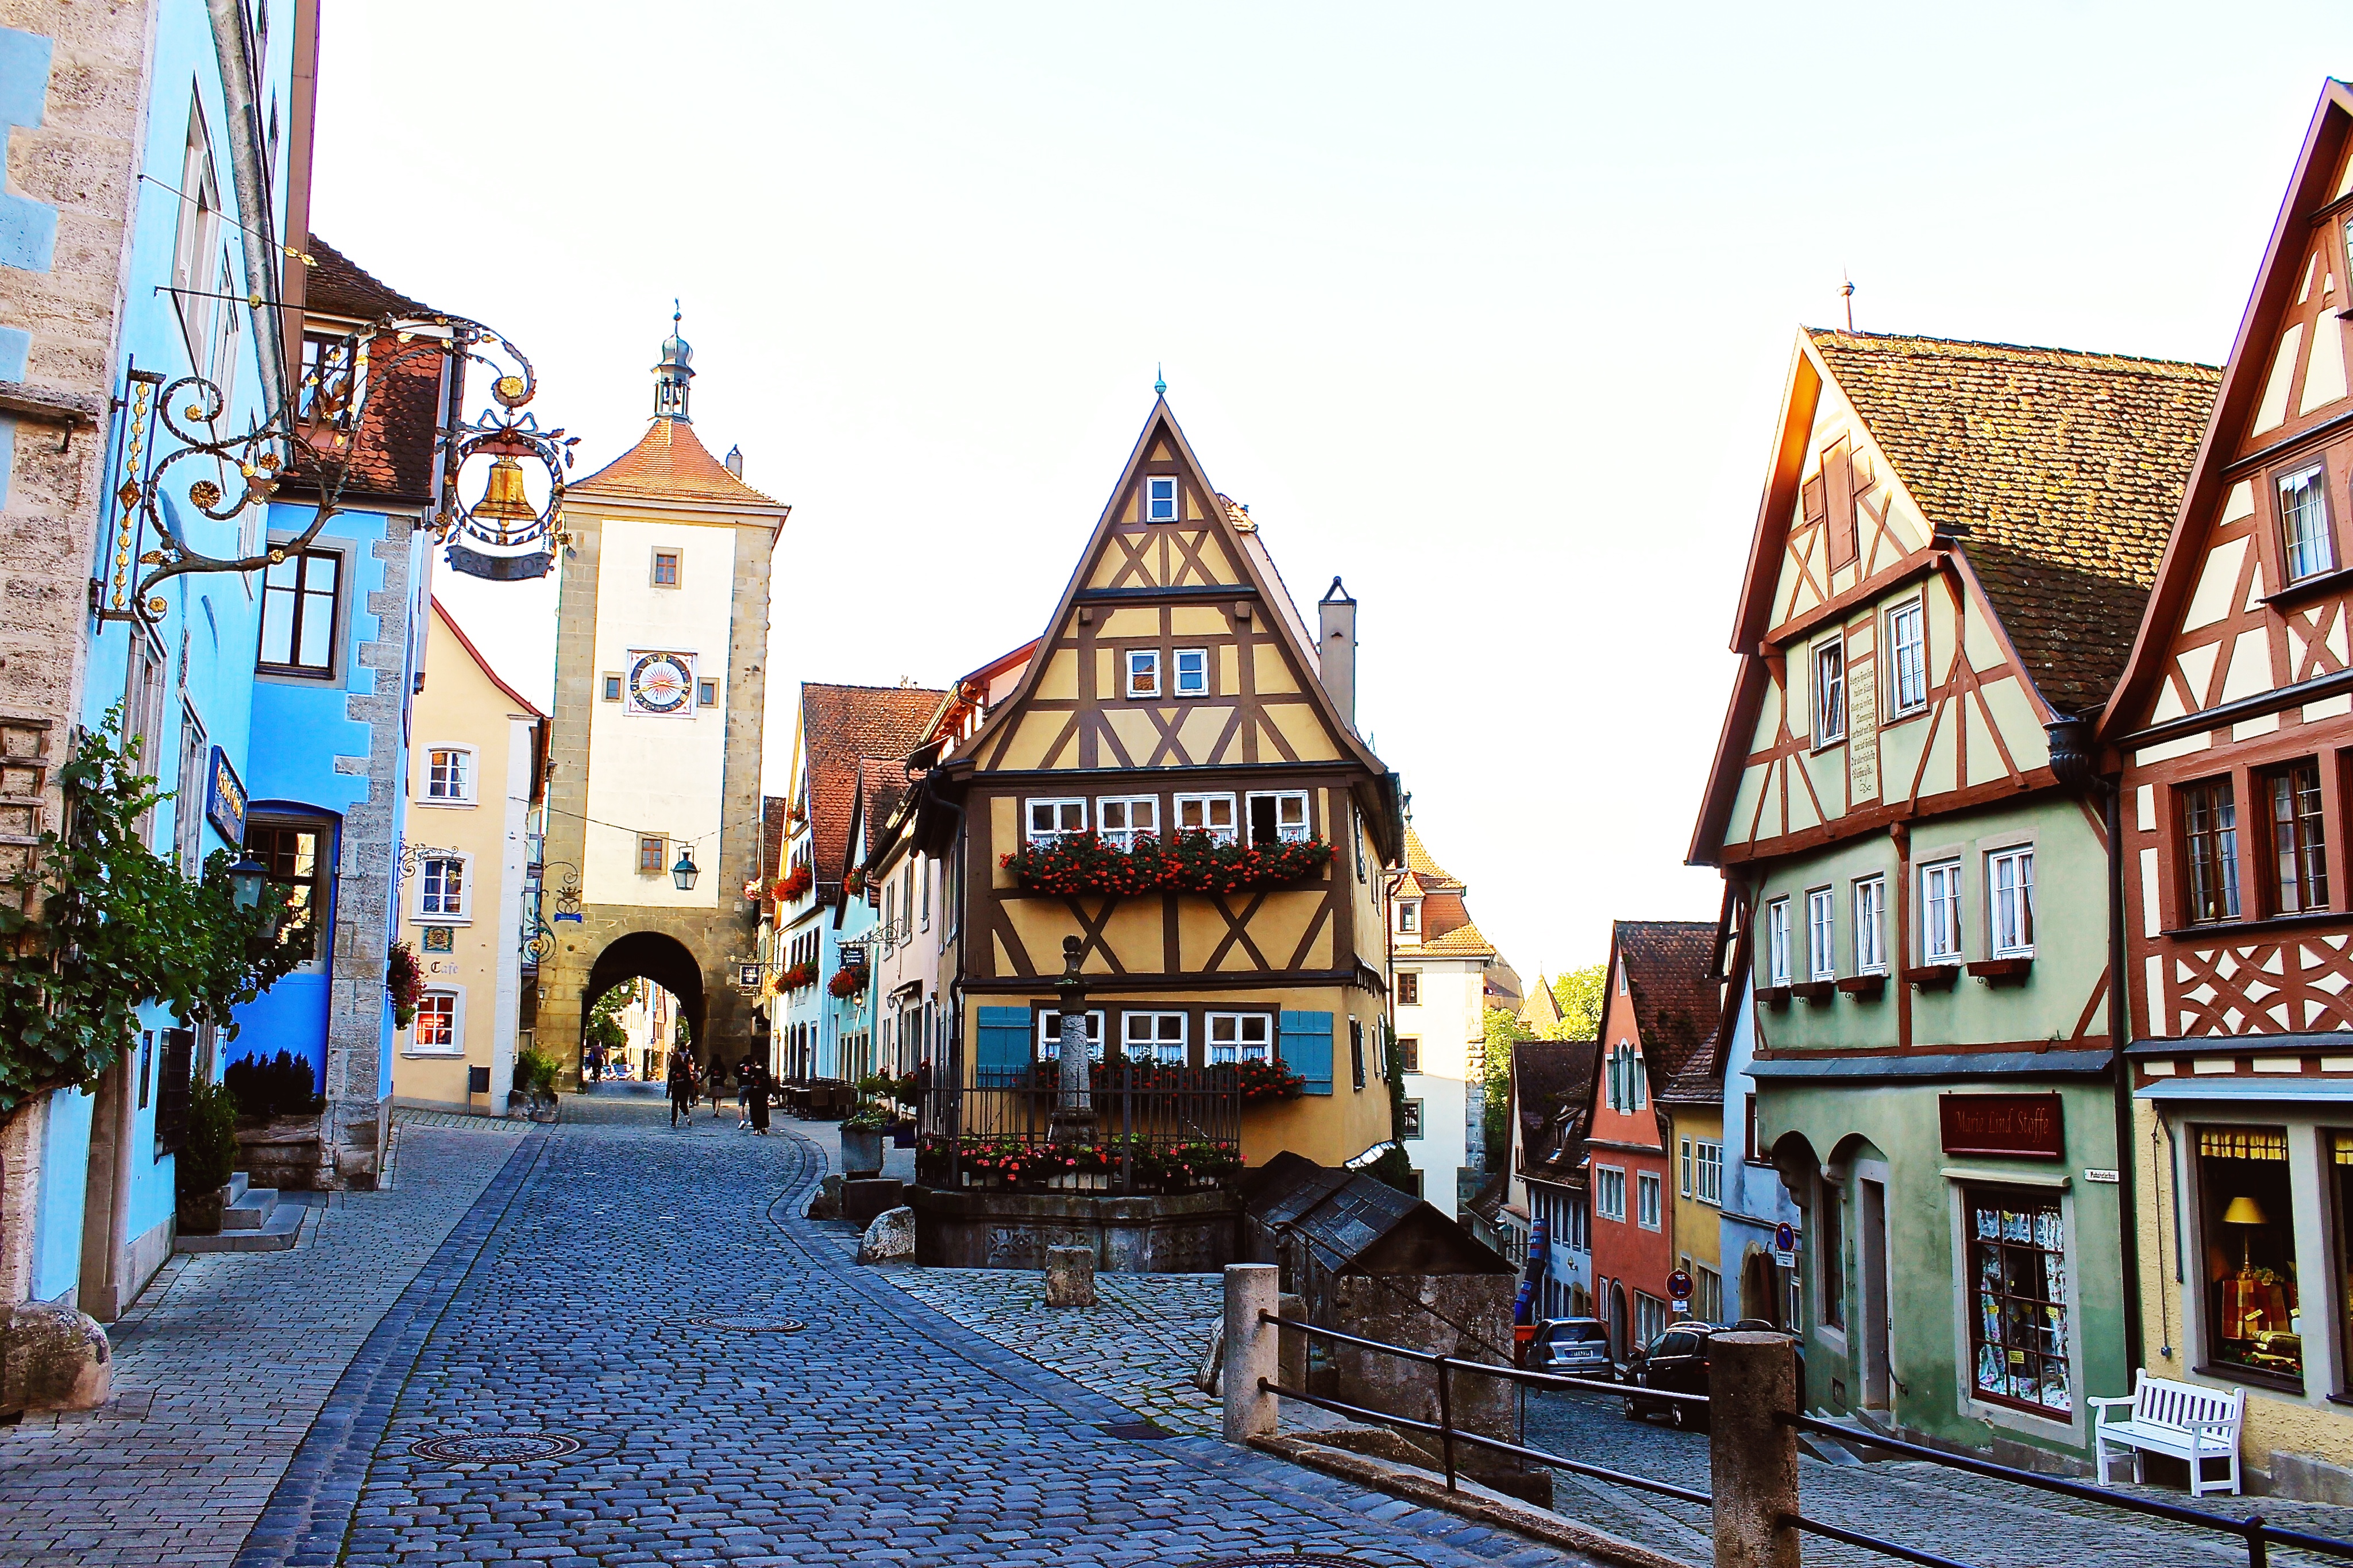 Rothenburg ob der Tauber—7 Things to See in This Fairy Tale Town ...